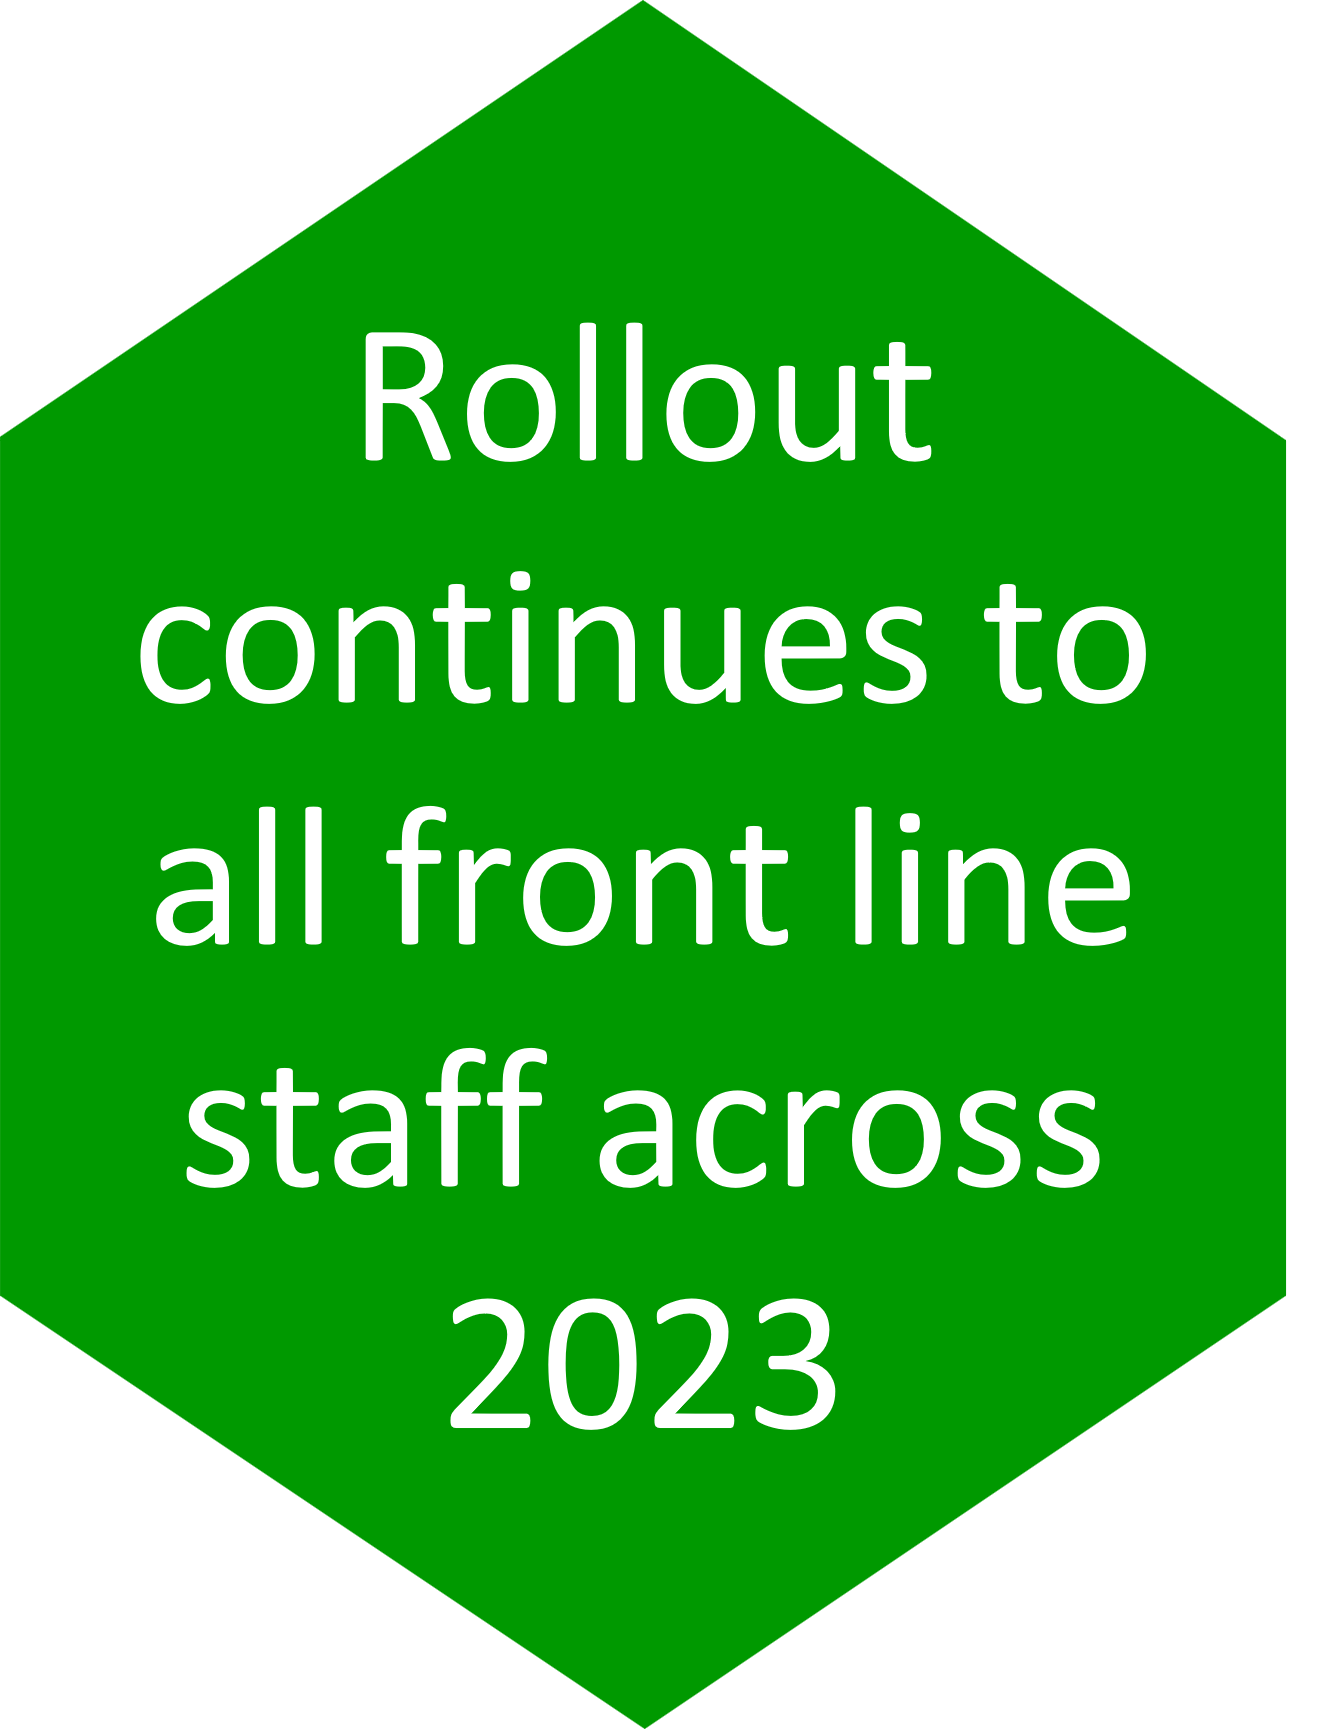 A green hexagon with white text within it reading 'Rollout continues to all front line staff across 2023'.